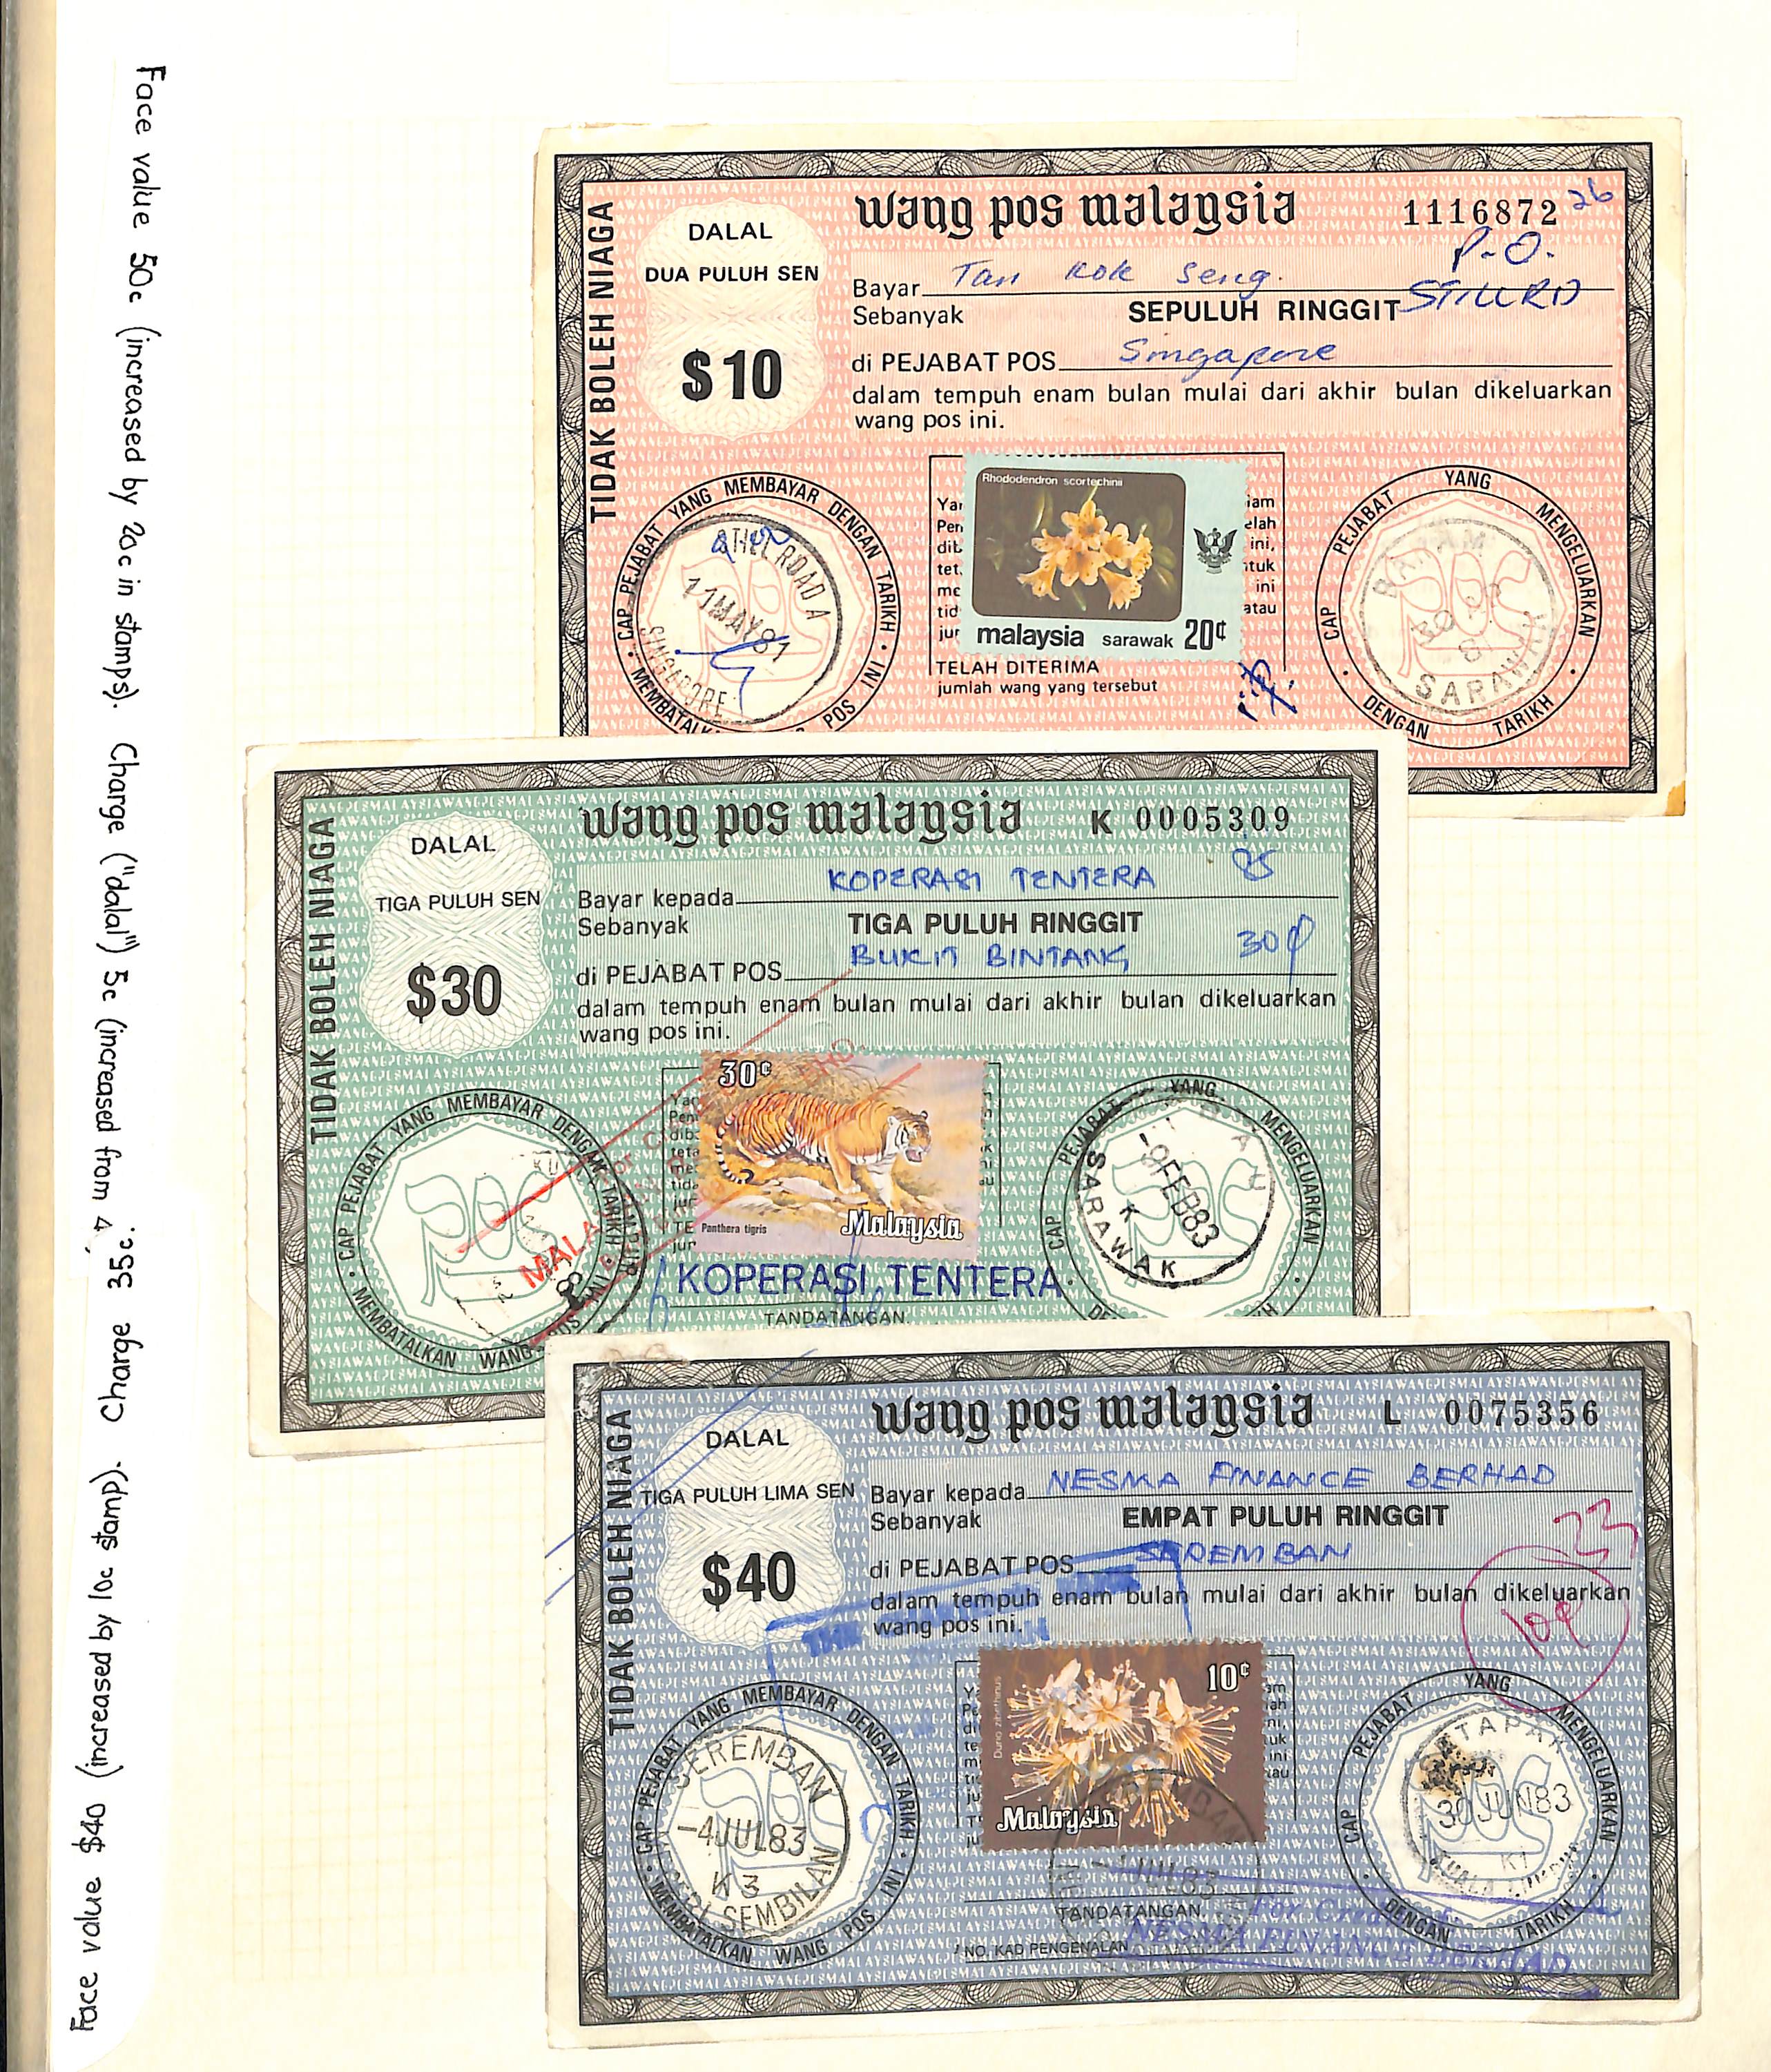 Postal Orders. 1973-84 Singapore or Malayan Postal Orders (14) and a Money Order, British Postal - Image 6 of 6